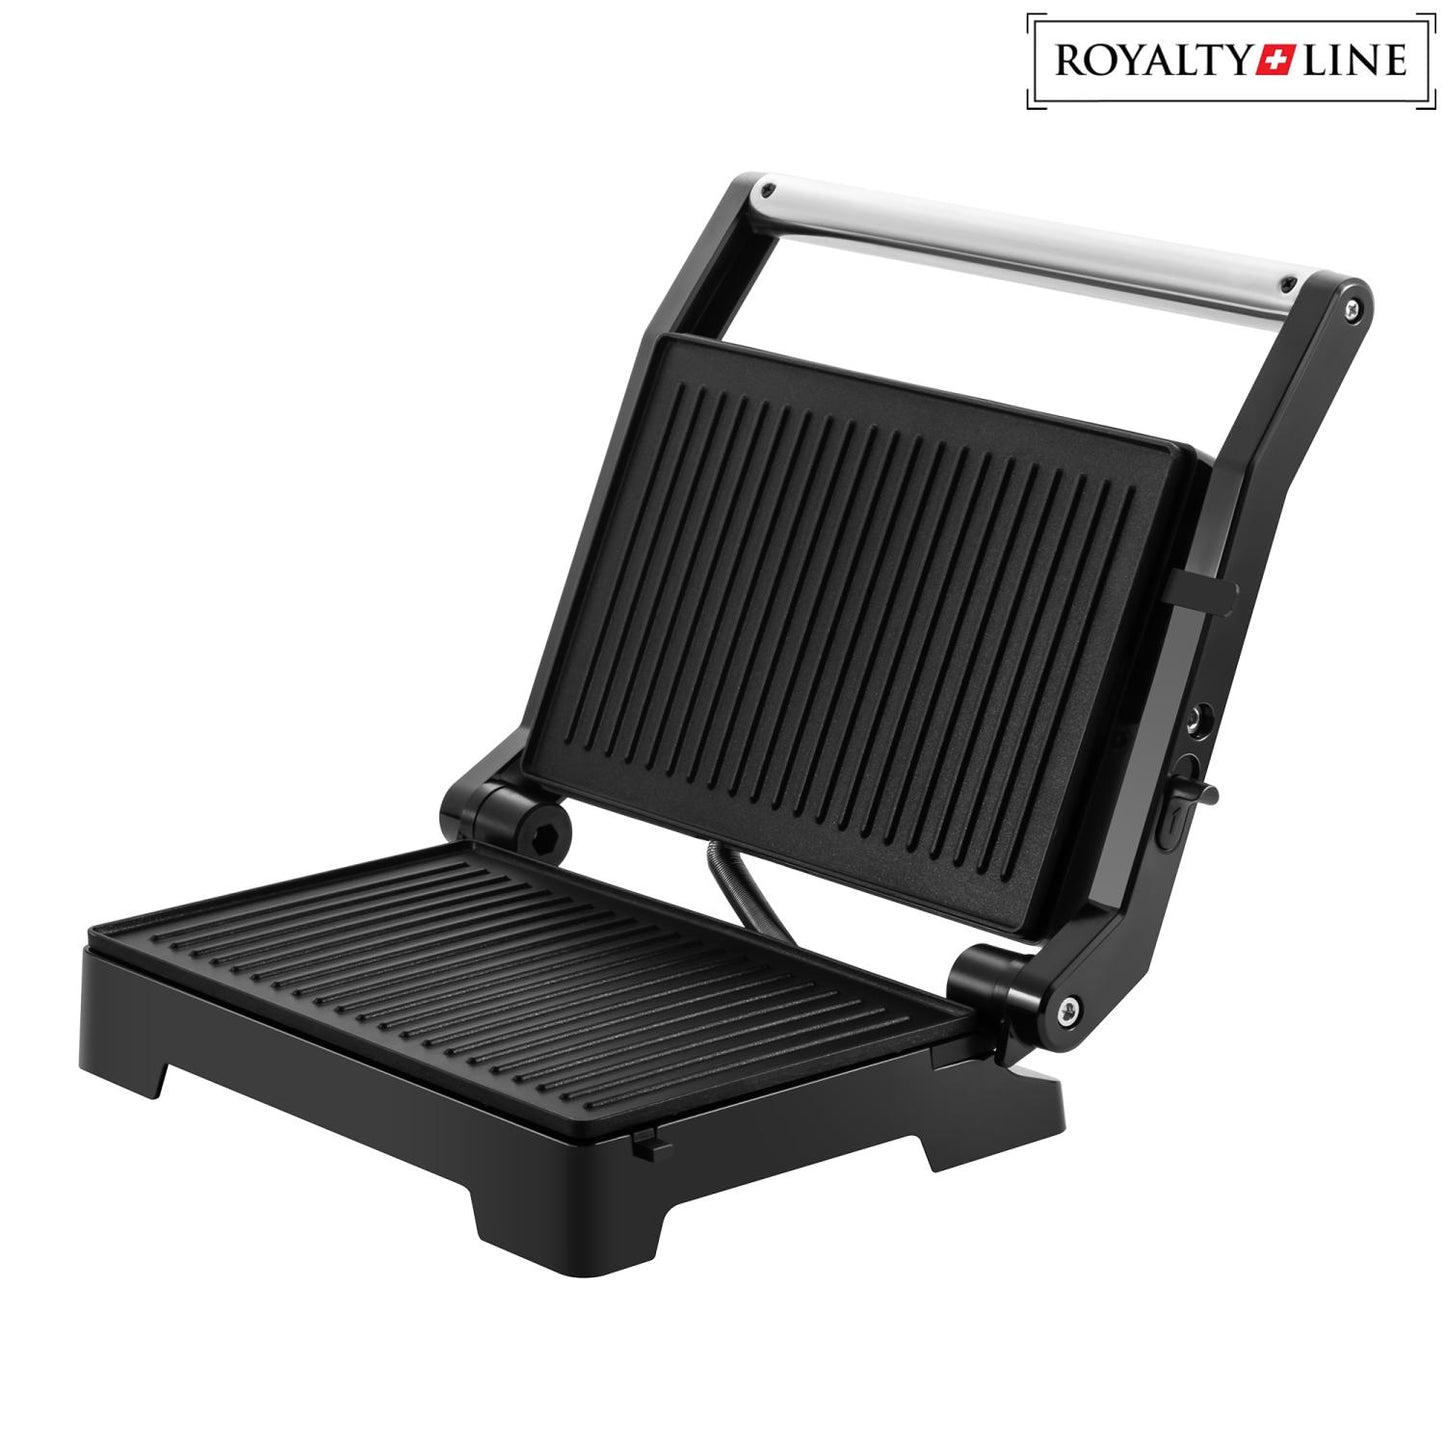 Royalty Line Toaster Grill 1000W Red